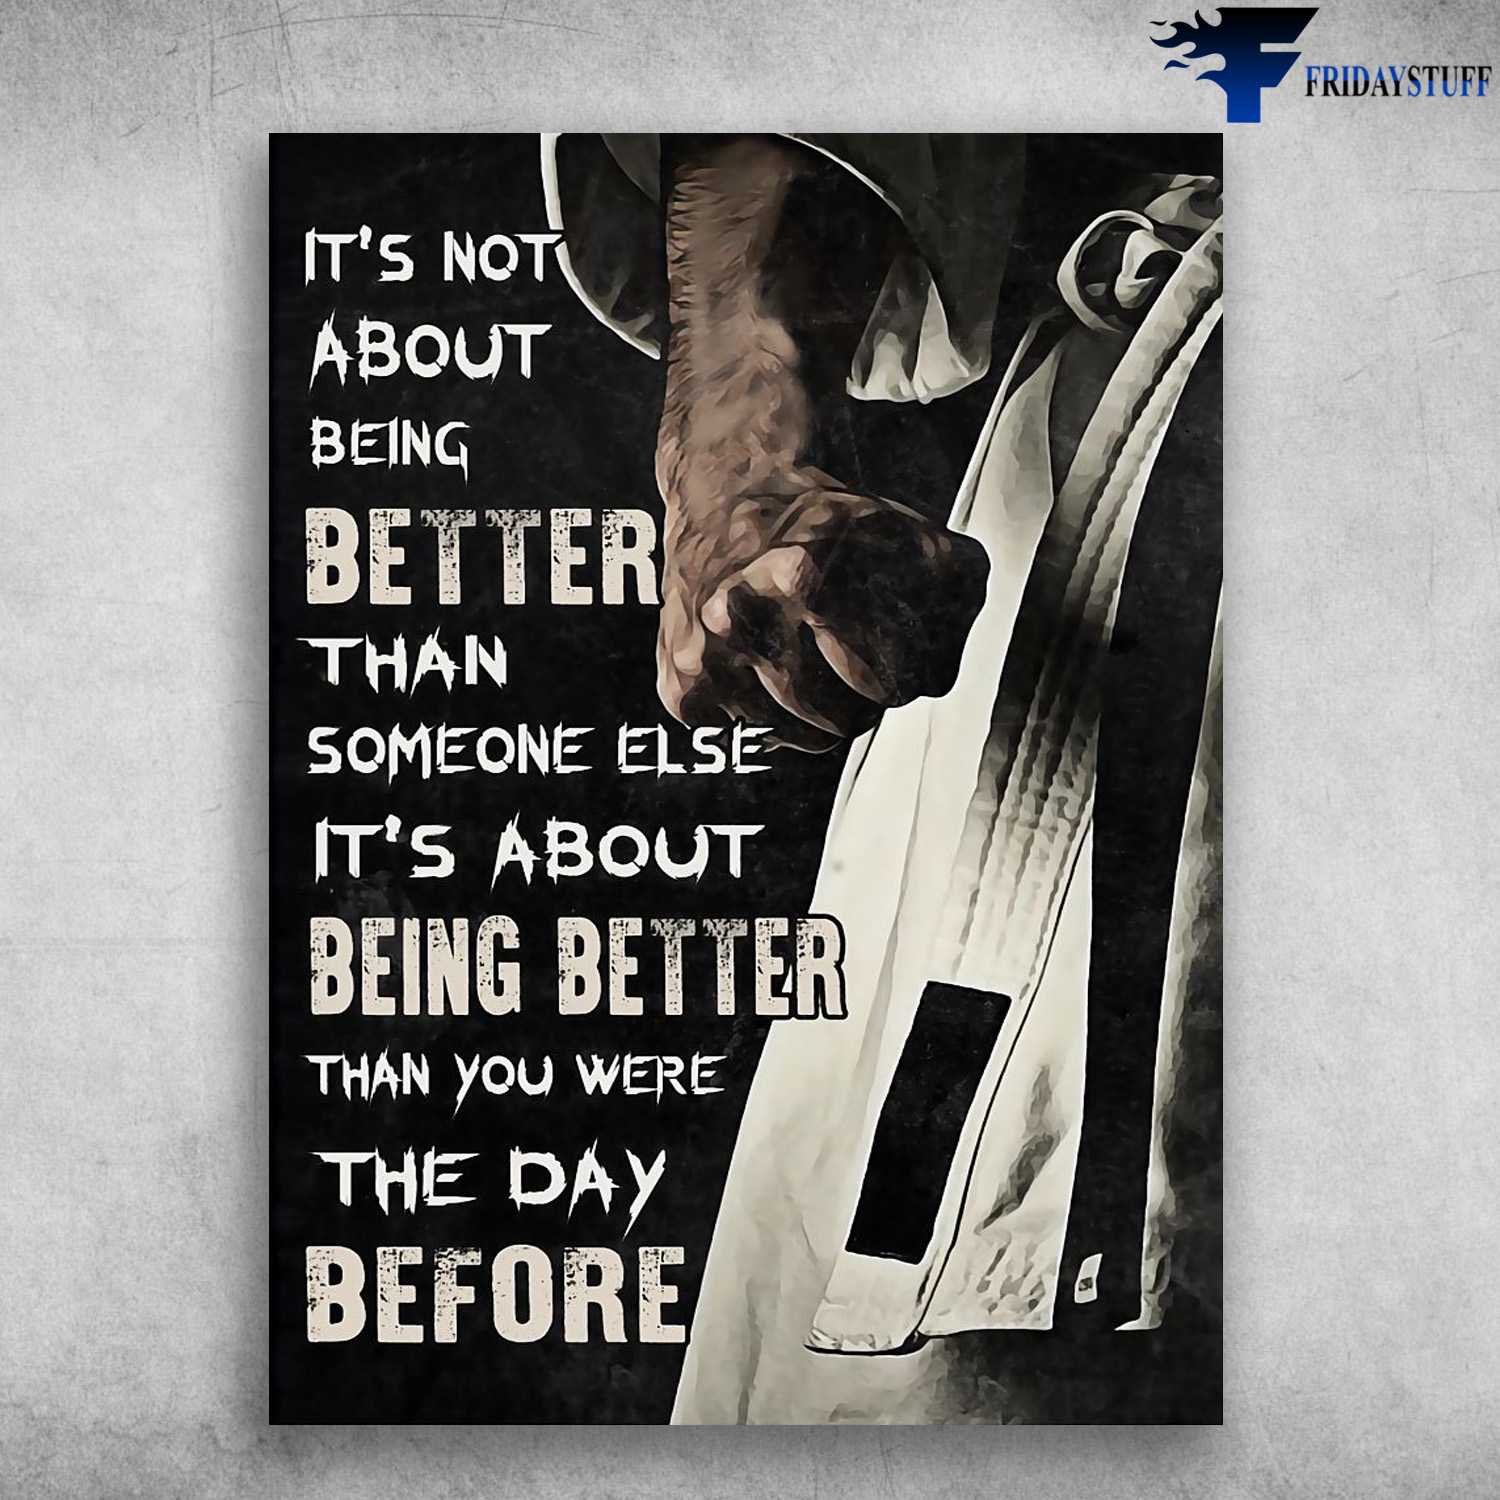 Teakwondo Poster, It's Not About Being Better Than Someone Else, It About Being Beter Than You Were The Day Before